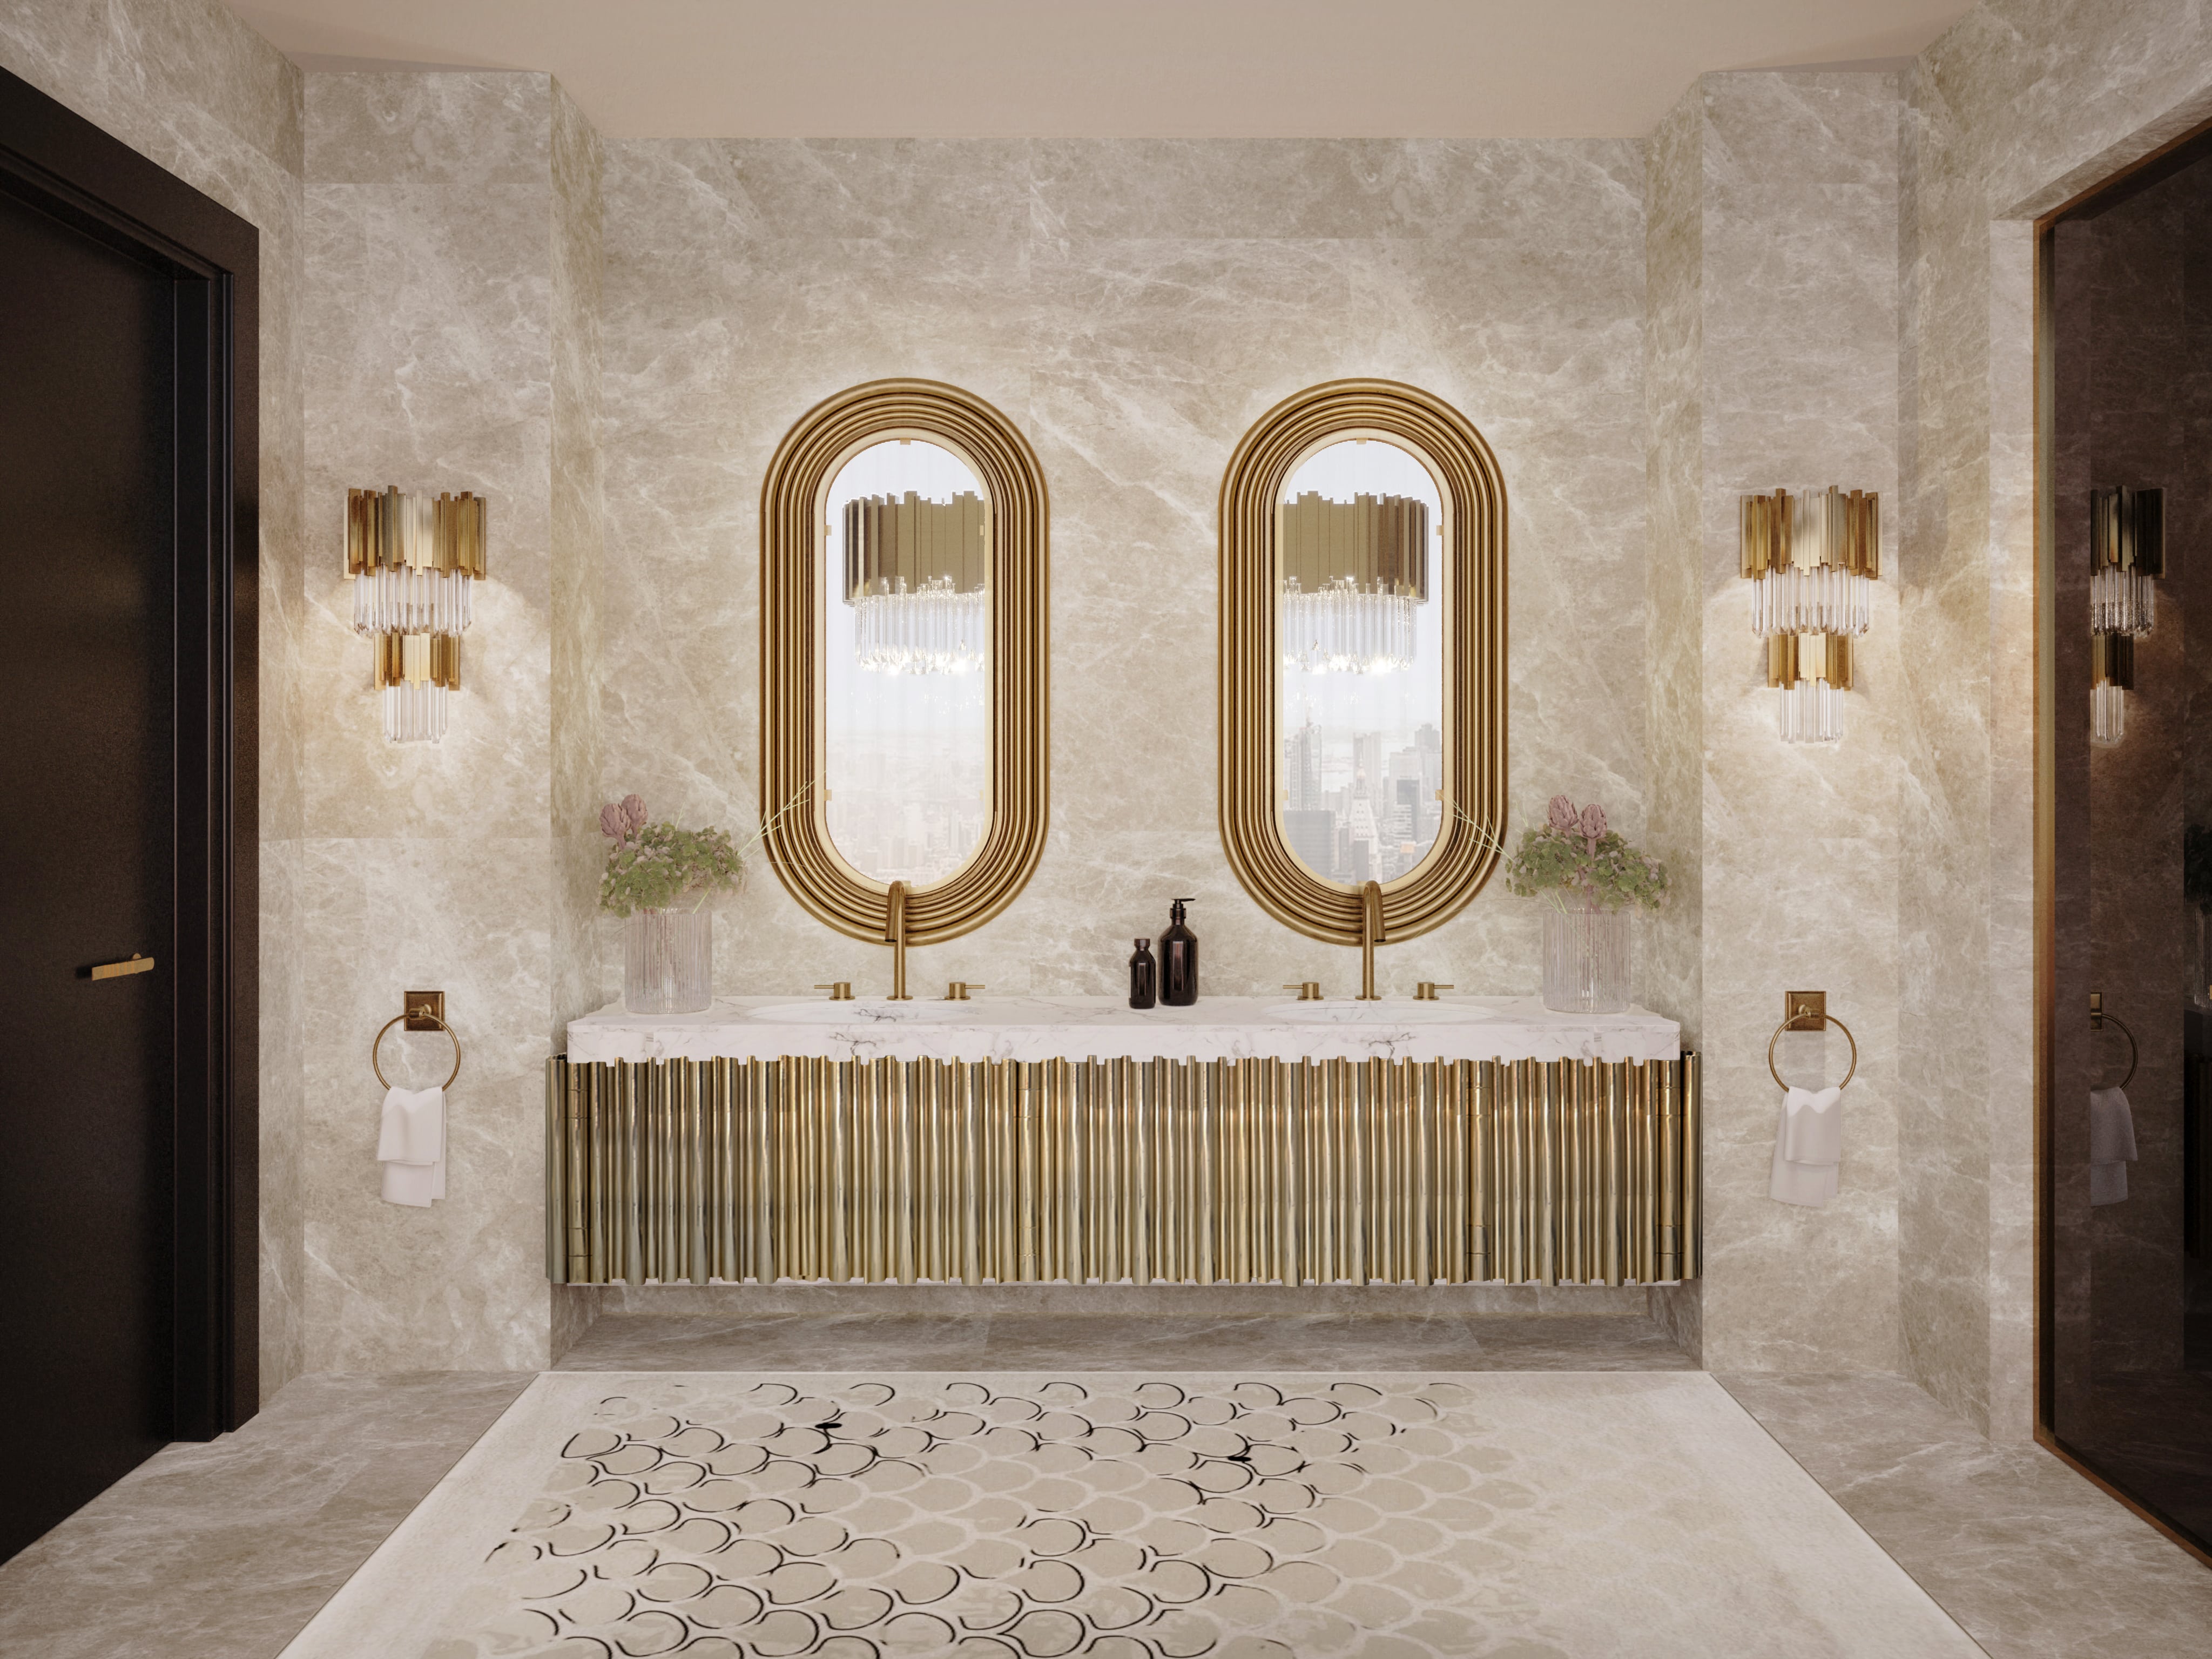 Luxury Bathroom Design With Polished Brass Mirror - Home'Society